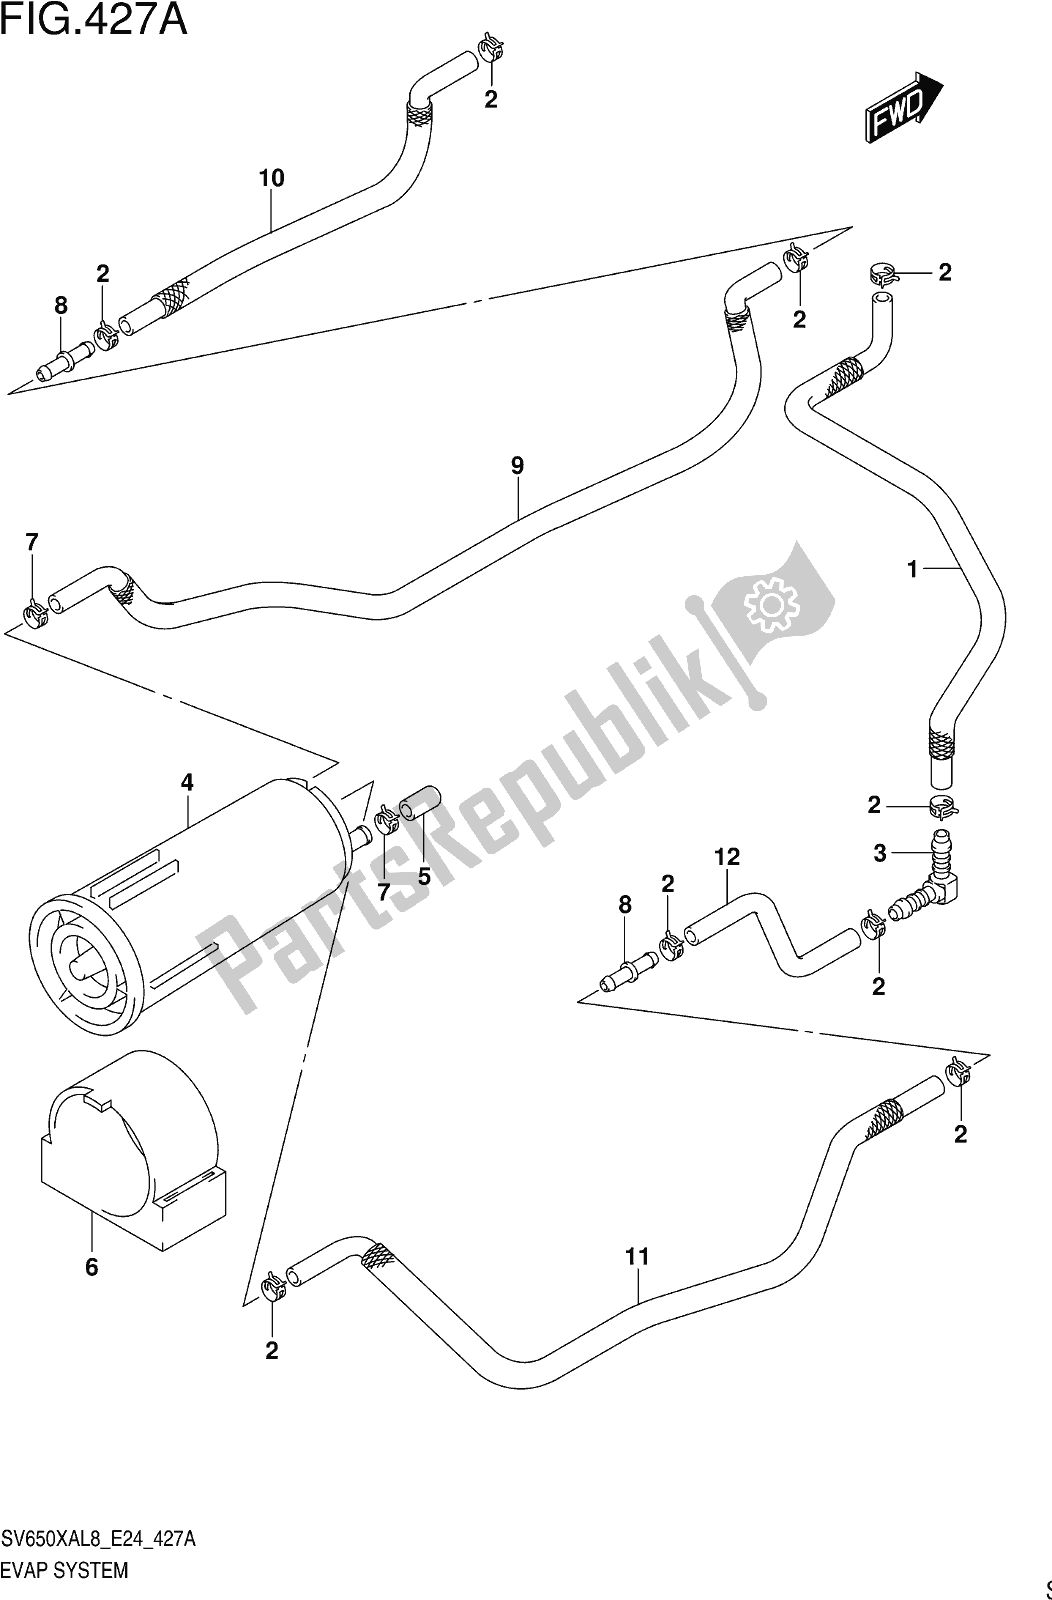 All parts for the Fig. 427a Evap System of the Suzuki SV 650 XAU 2018